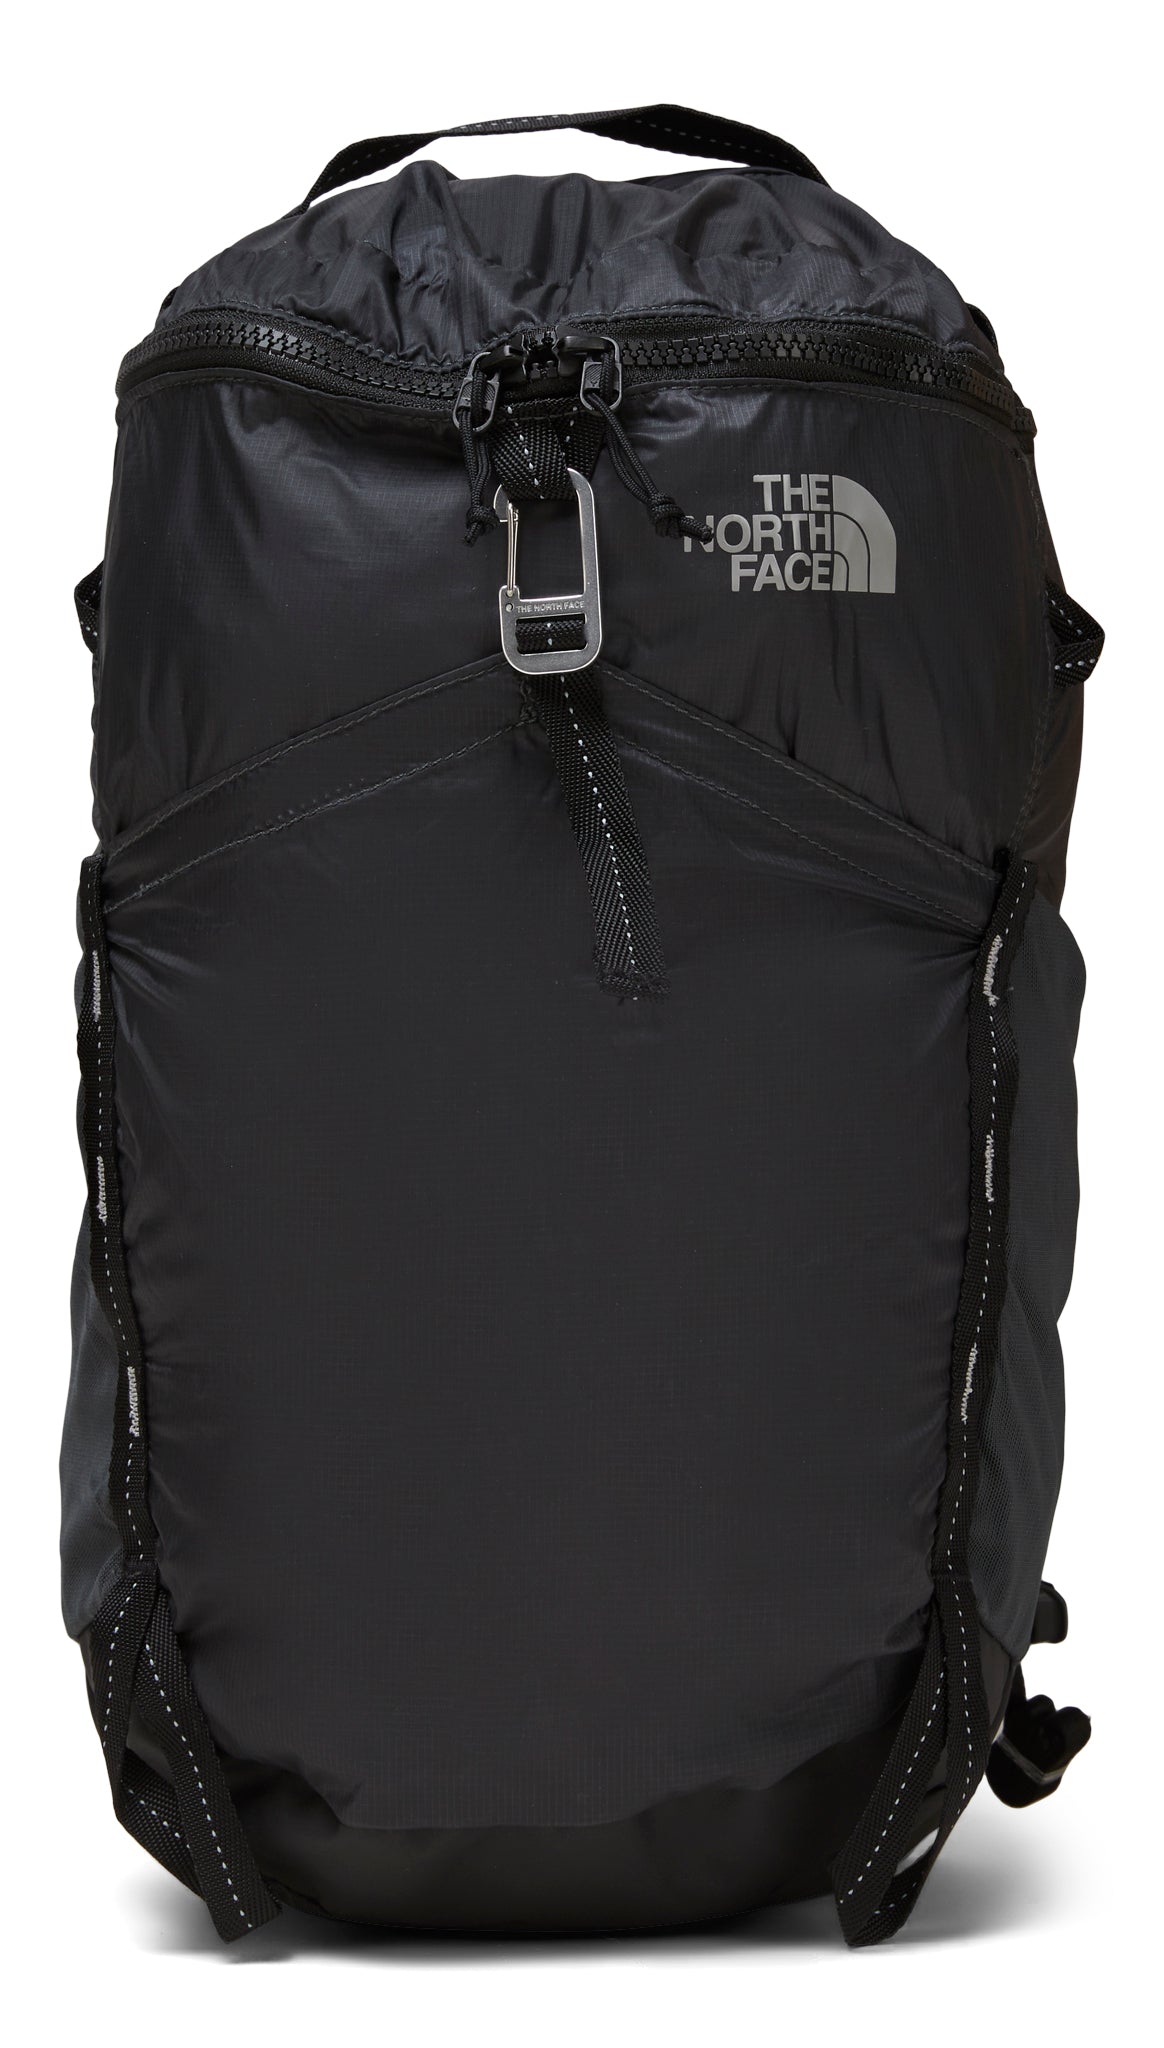 The North Face Flyweight Backpack - Unisex